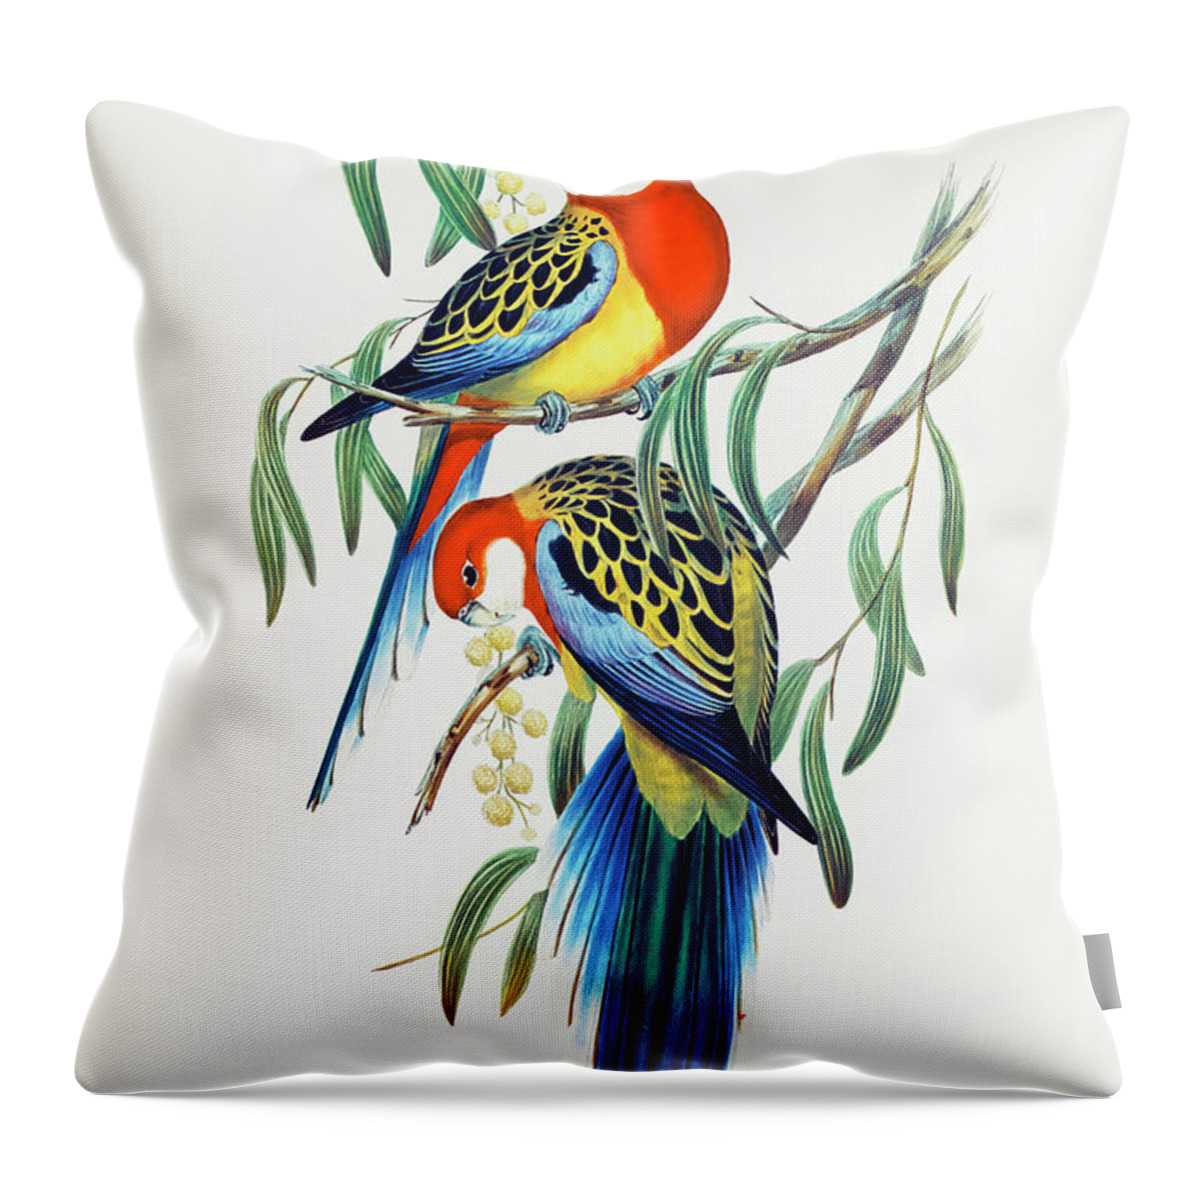 Rose-hill Parakeet Throw Pillow featuring the drawing Rose-hill Parakeet by Elizabeth Gould